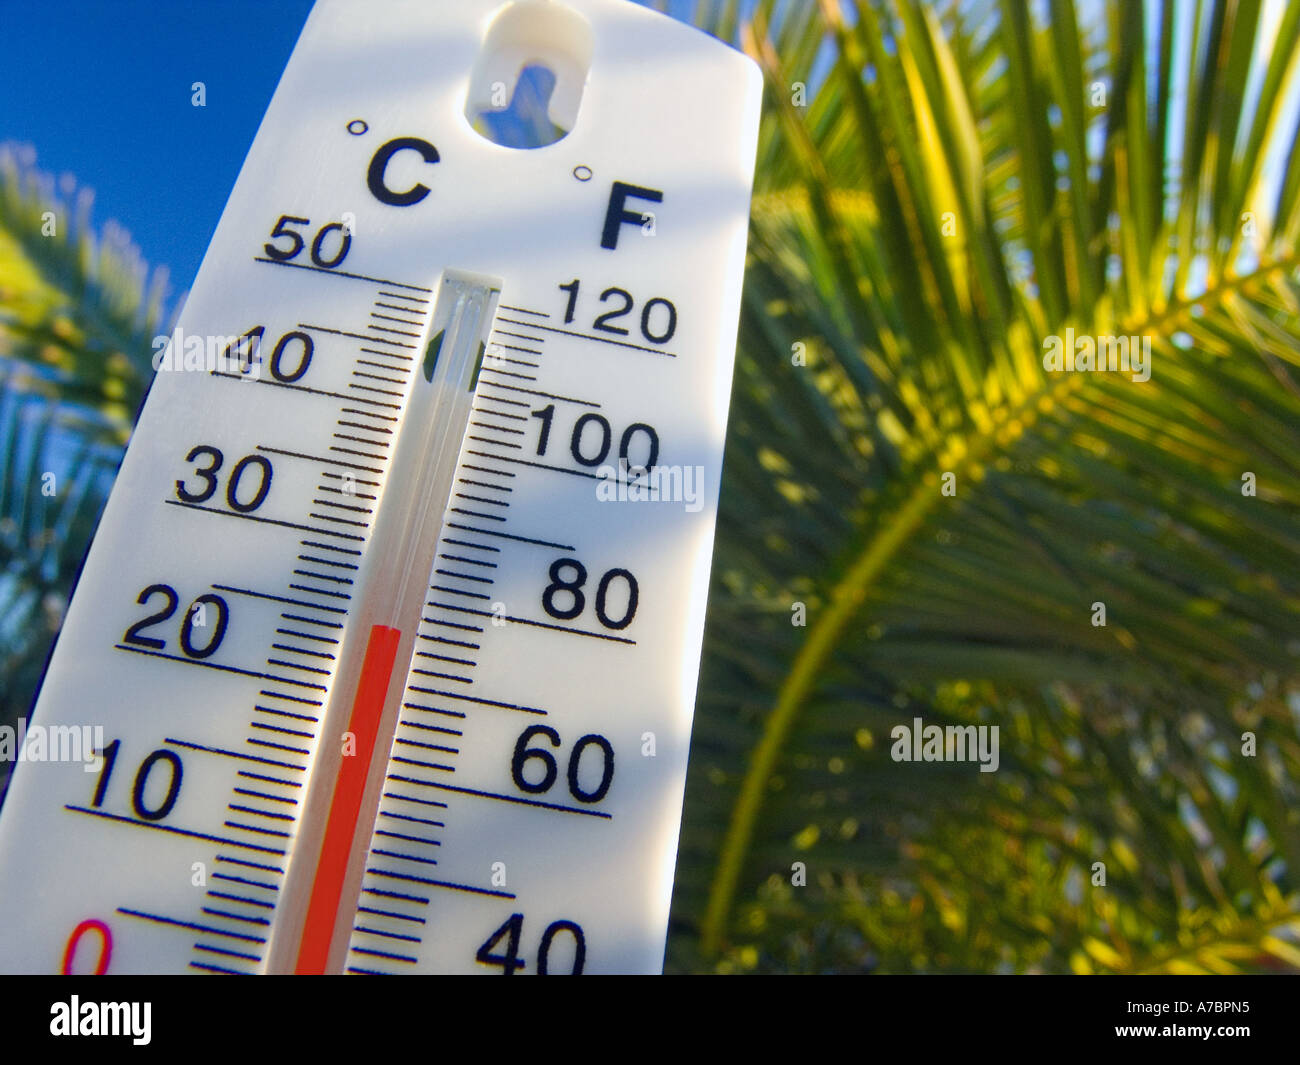 https://c8.alamy.com/comp/A7BPN5/holiday-sun-weather-forecast-temperature-thermometer-displays-a-perfect-A7BPN5.jpg